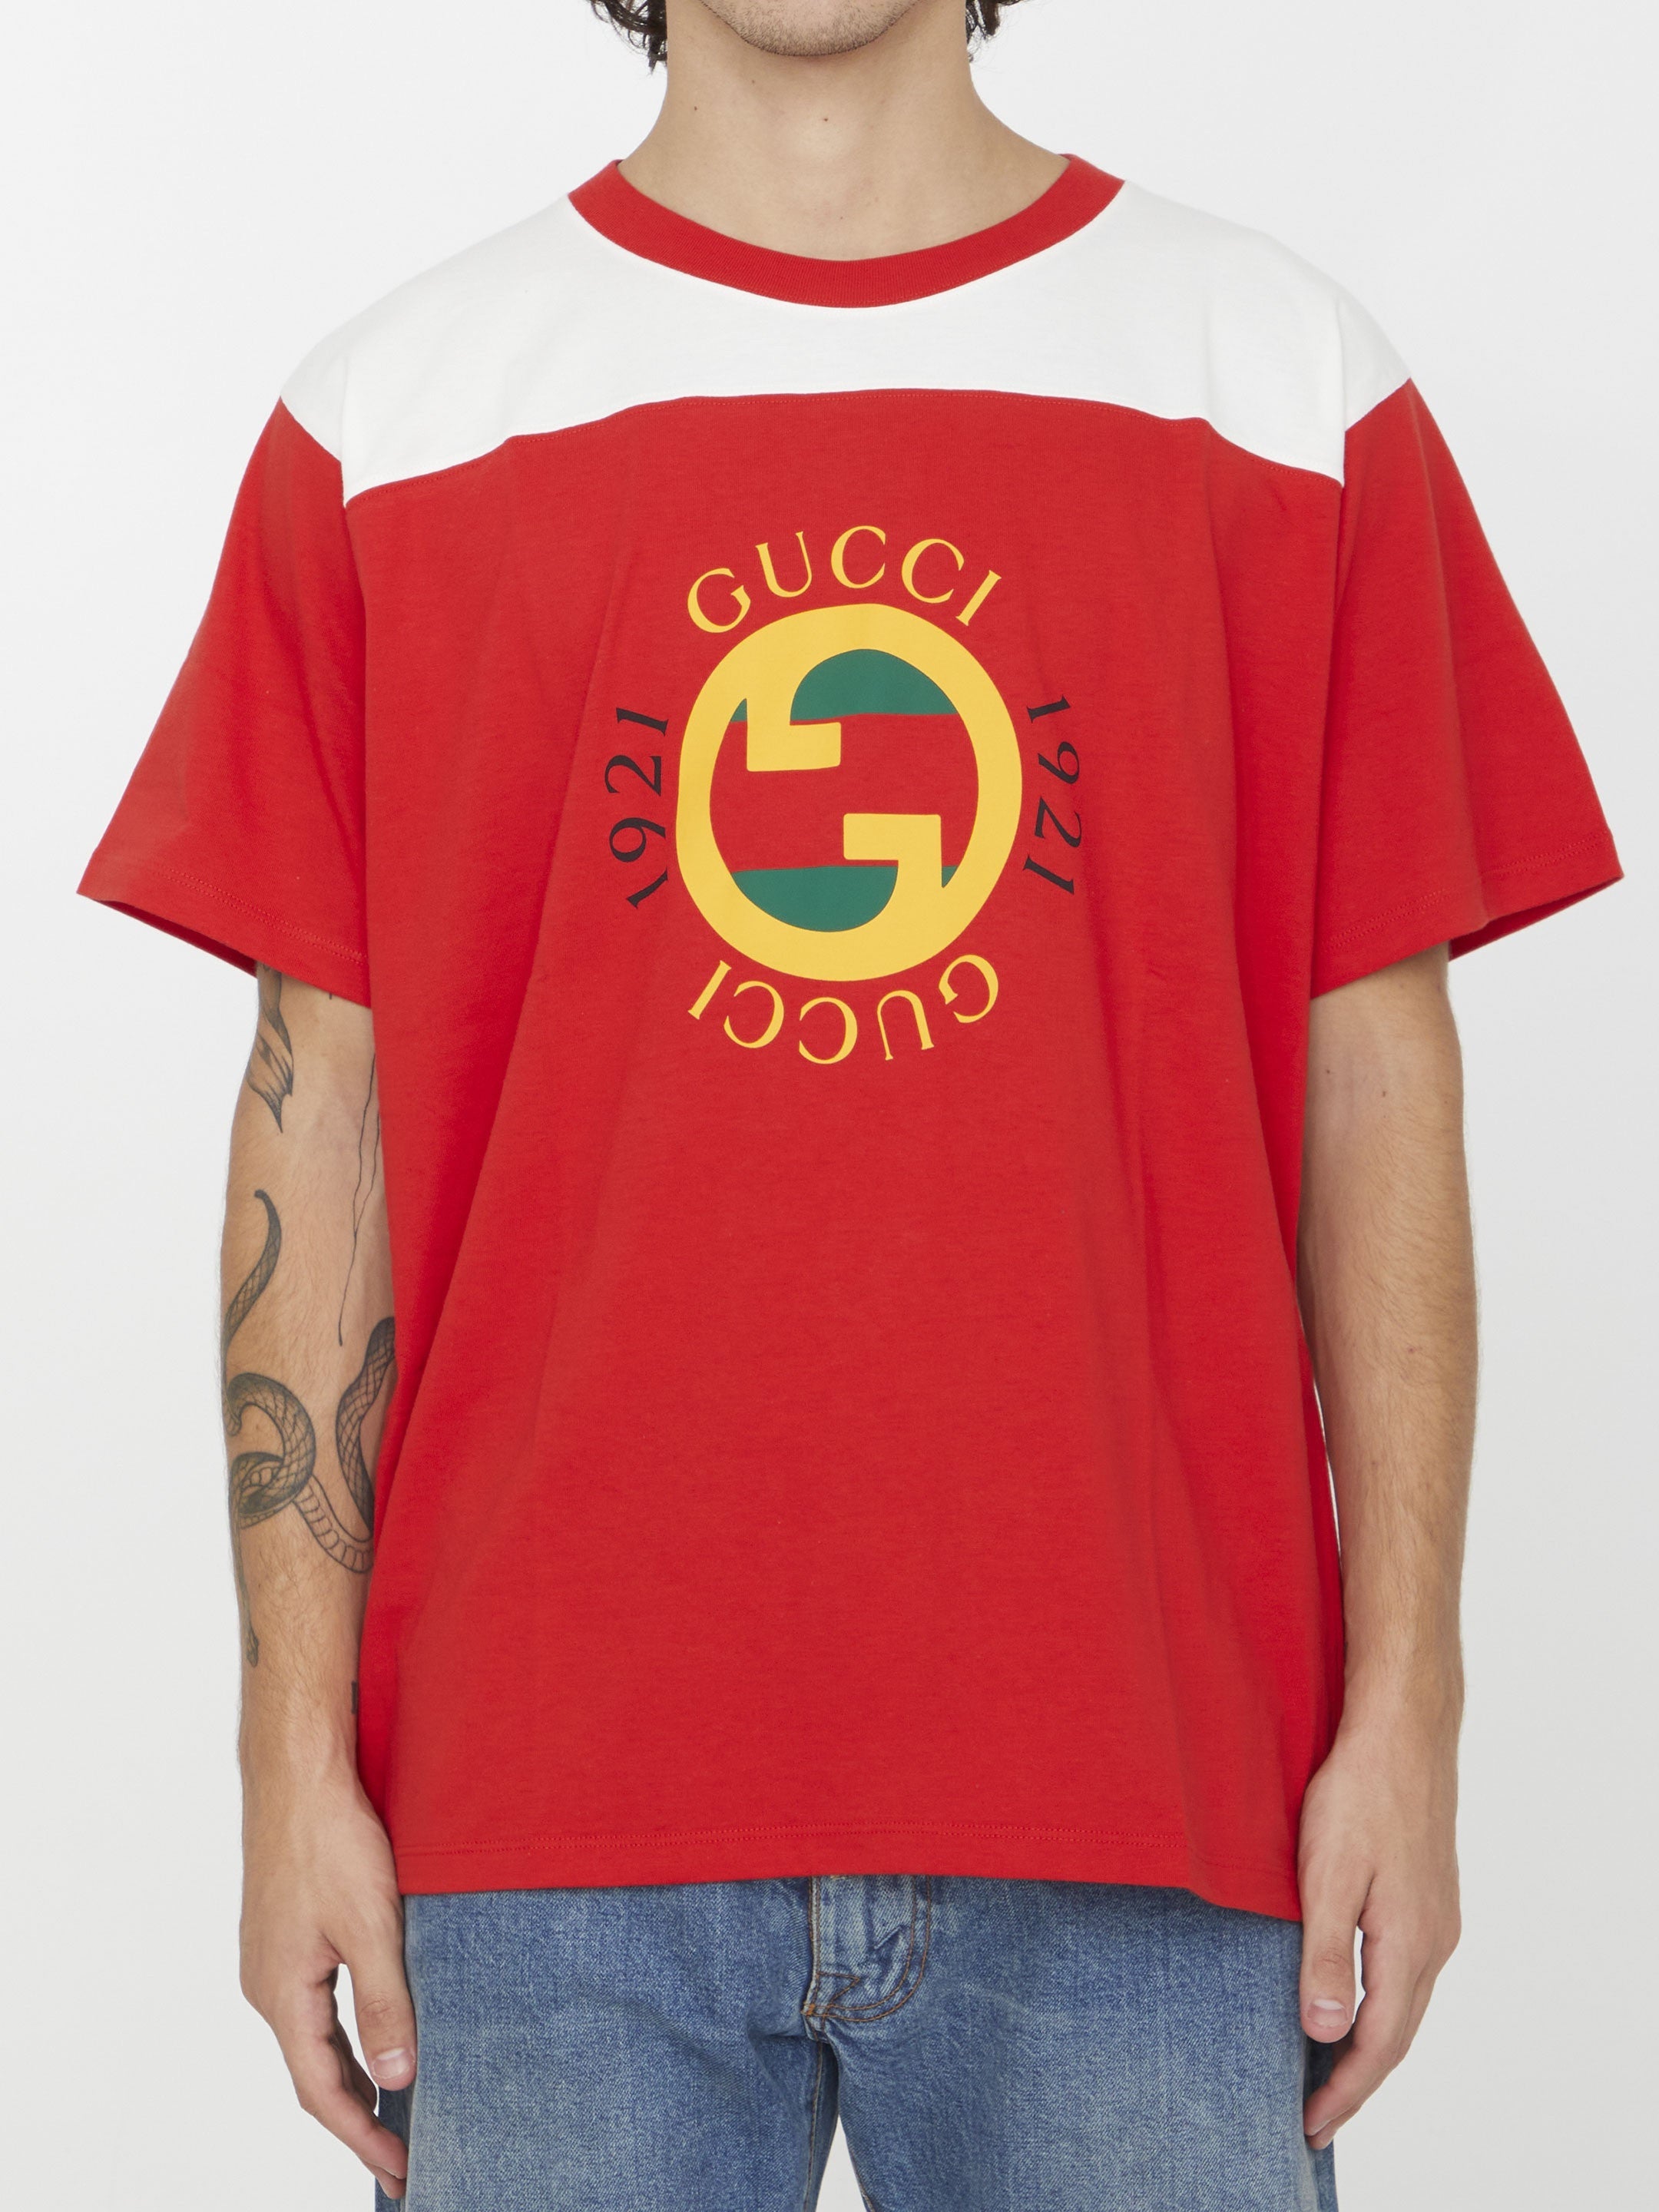 GUCCI-OUTLET-SALE-Cotton-jersey-t-shirt-Shirts-M-RED-ARCHIVE-COLLECTION.jpg